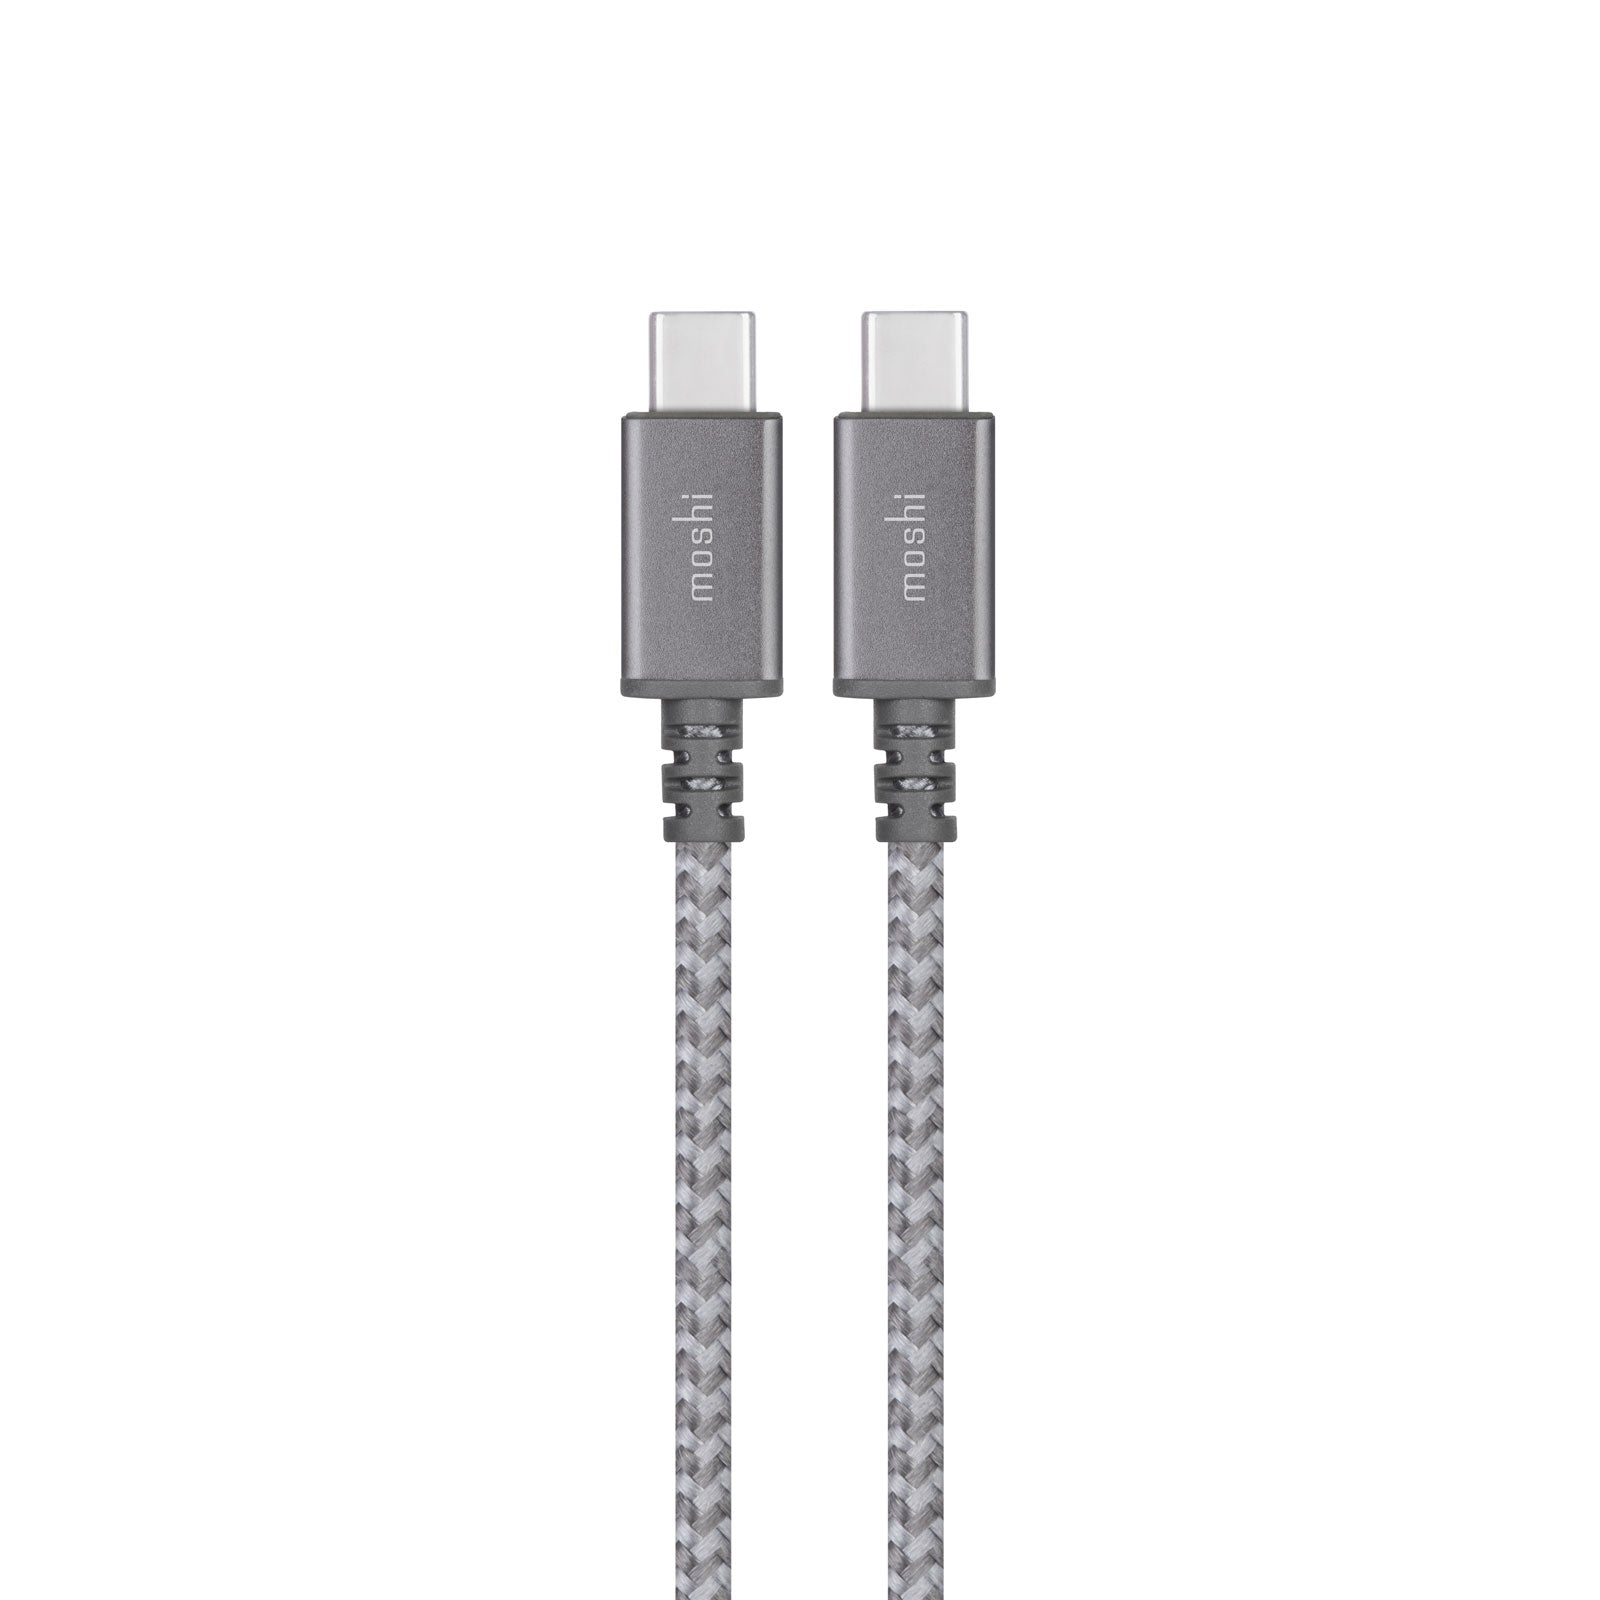  Moshi Integra USB C Charging Cable with Smart LED Charging  Indicator 6.6 ft /2m, Supports Power Delivery 3.0 100W Max, Data Transfer,  Ballistic Nylon Braiding, Aluminum Housings, for MacBook/iPad : Electronics